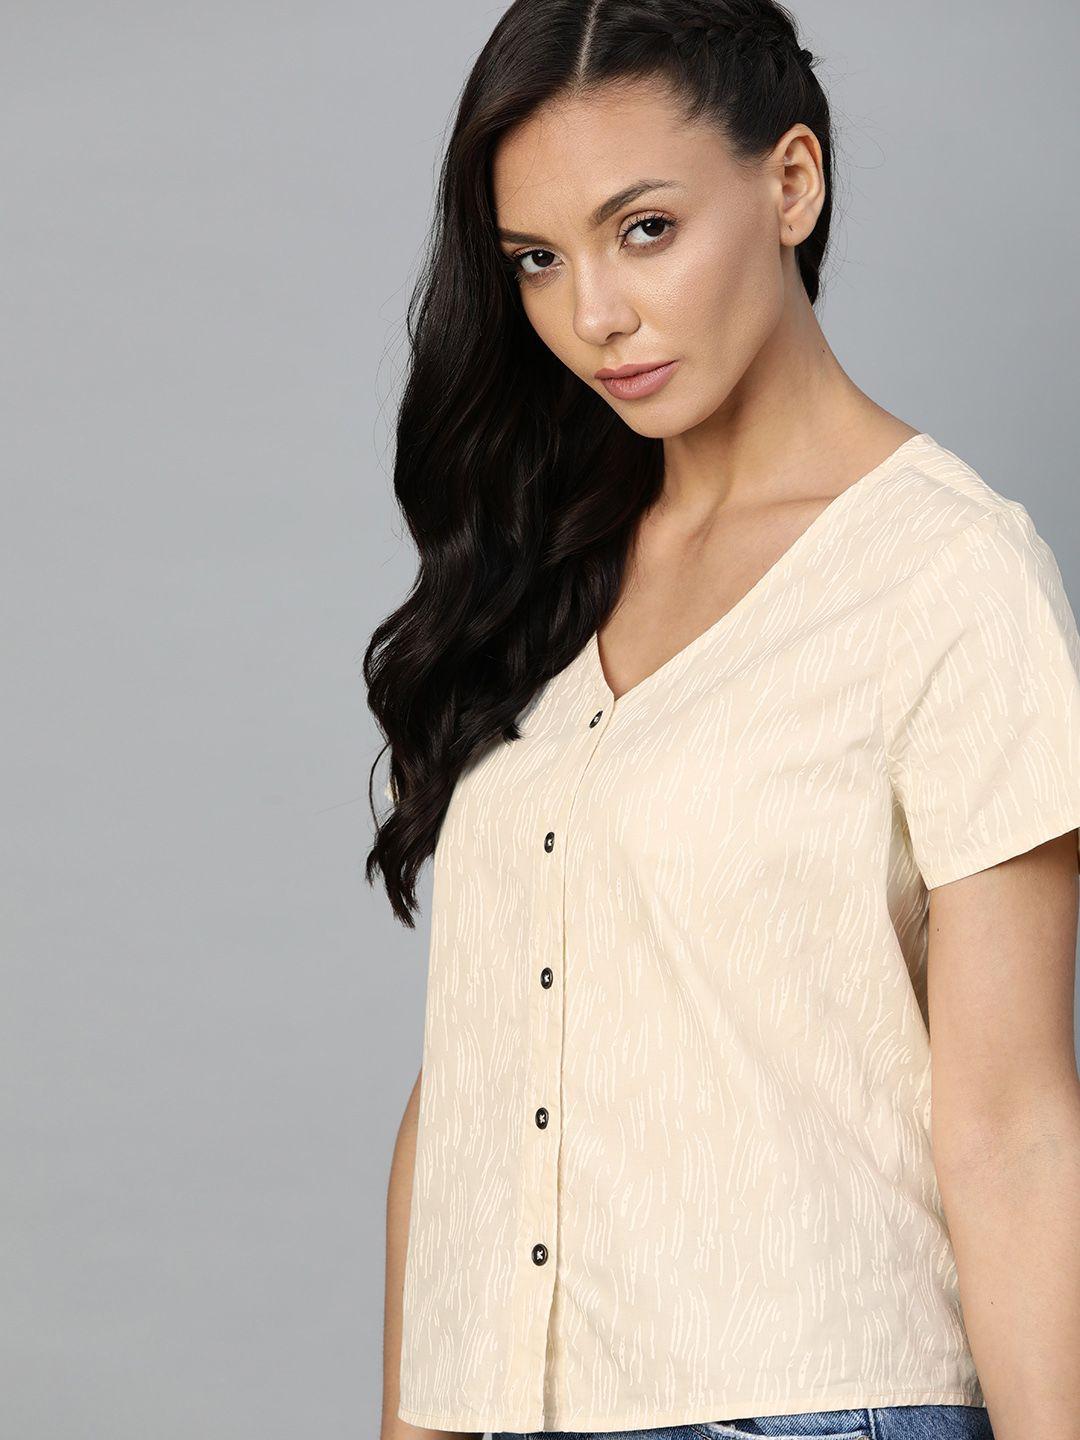 the-roadster-lifestyle-co-beige-&-white-pure-cotton-printed-regular-top